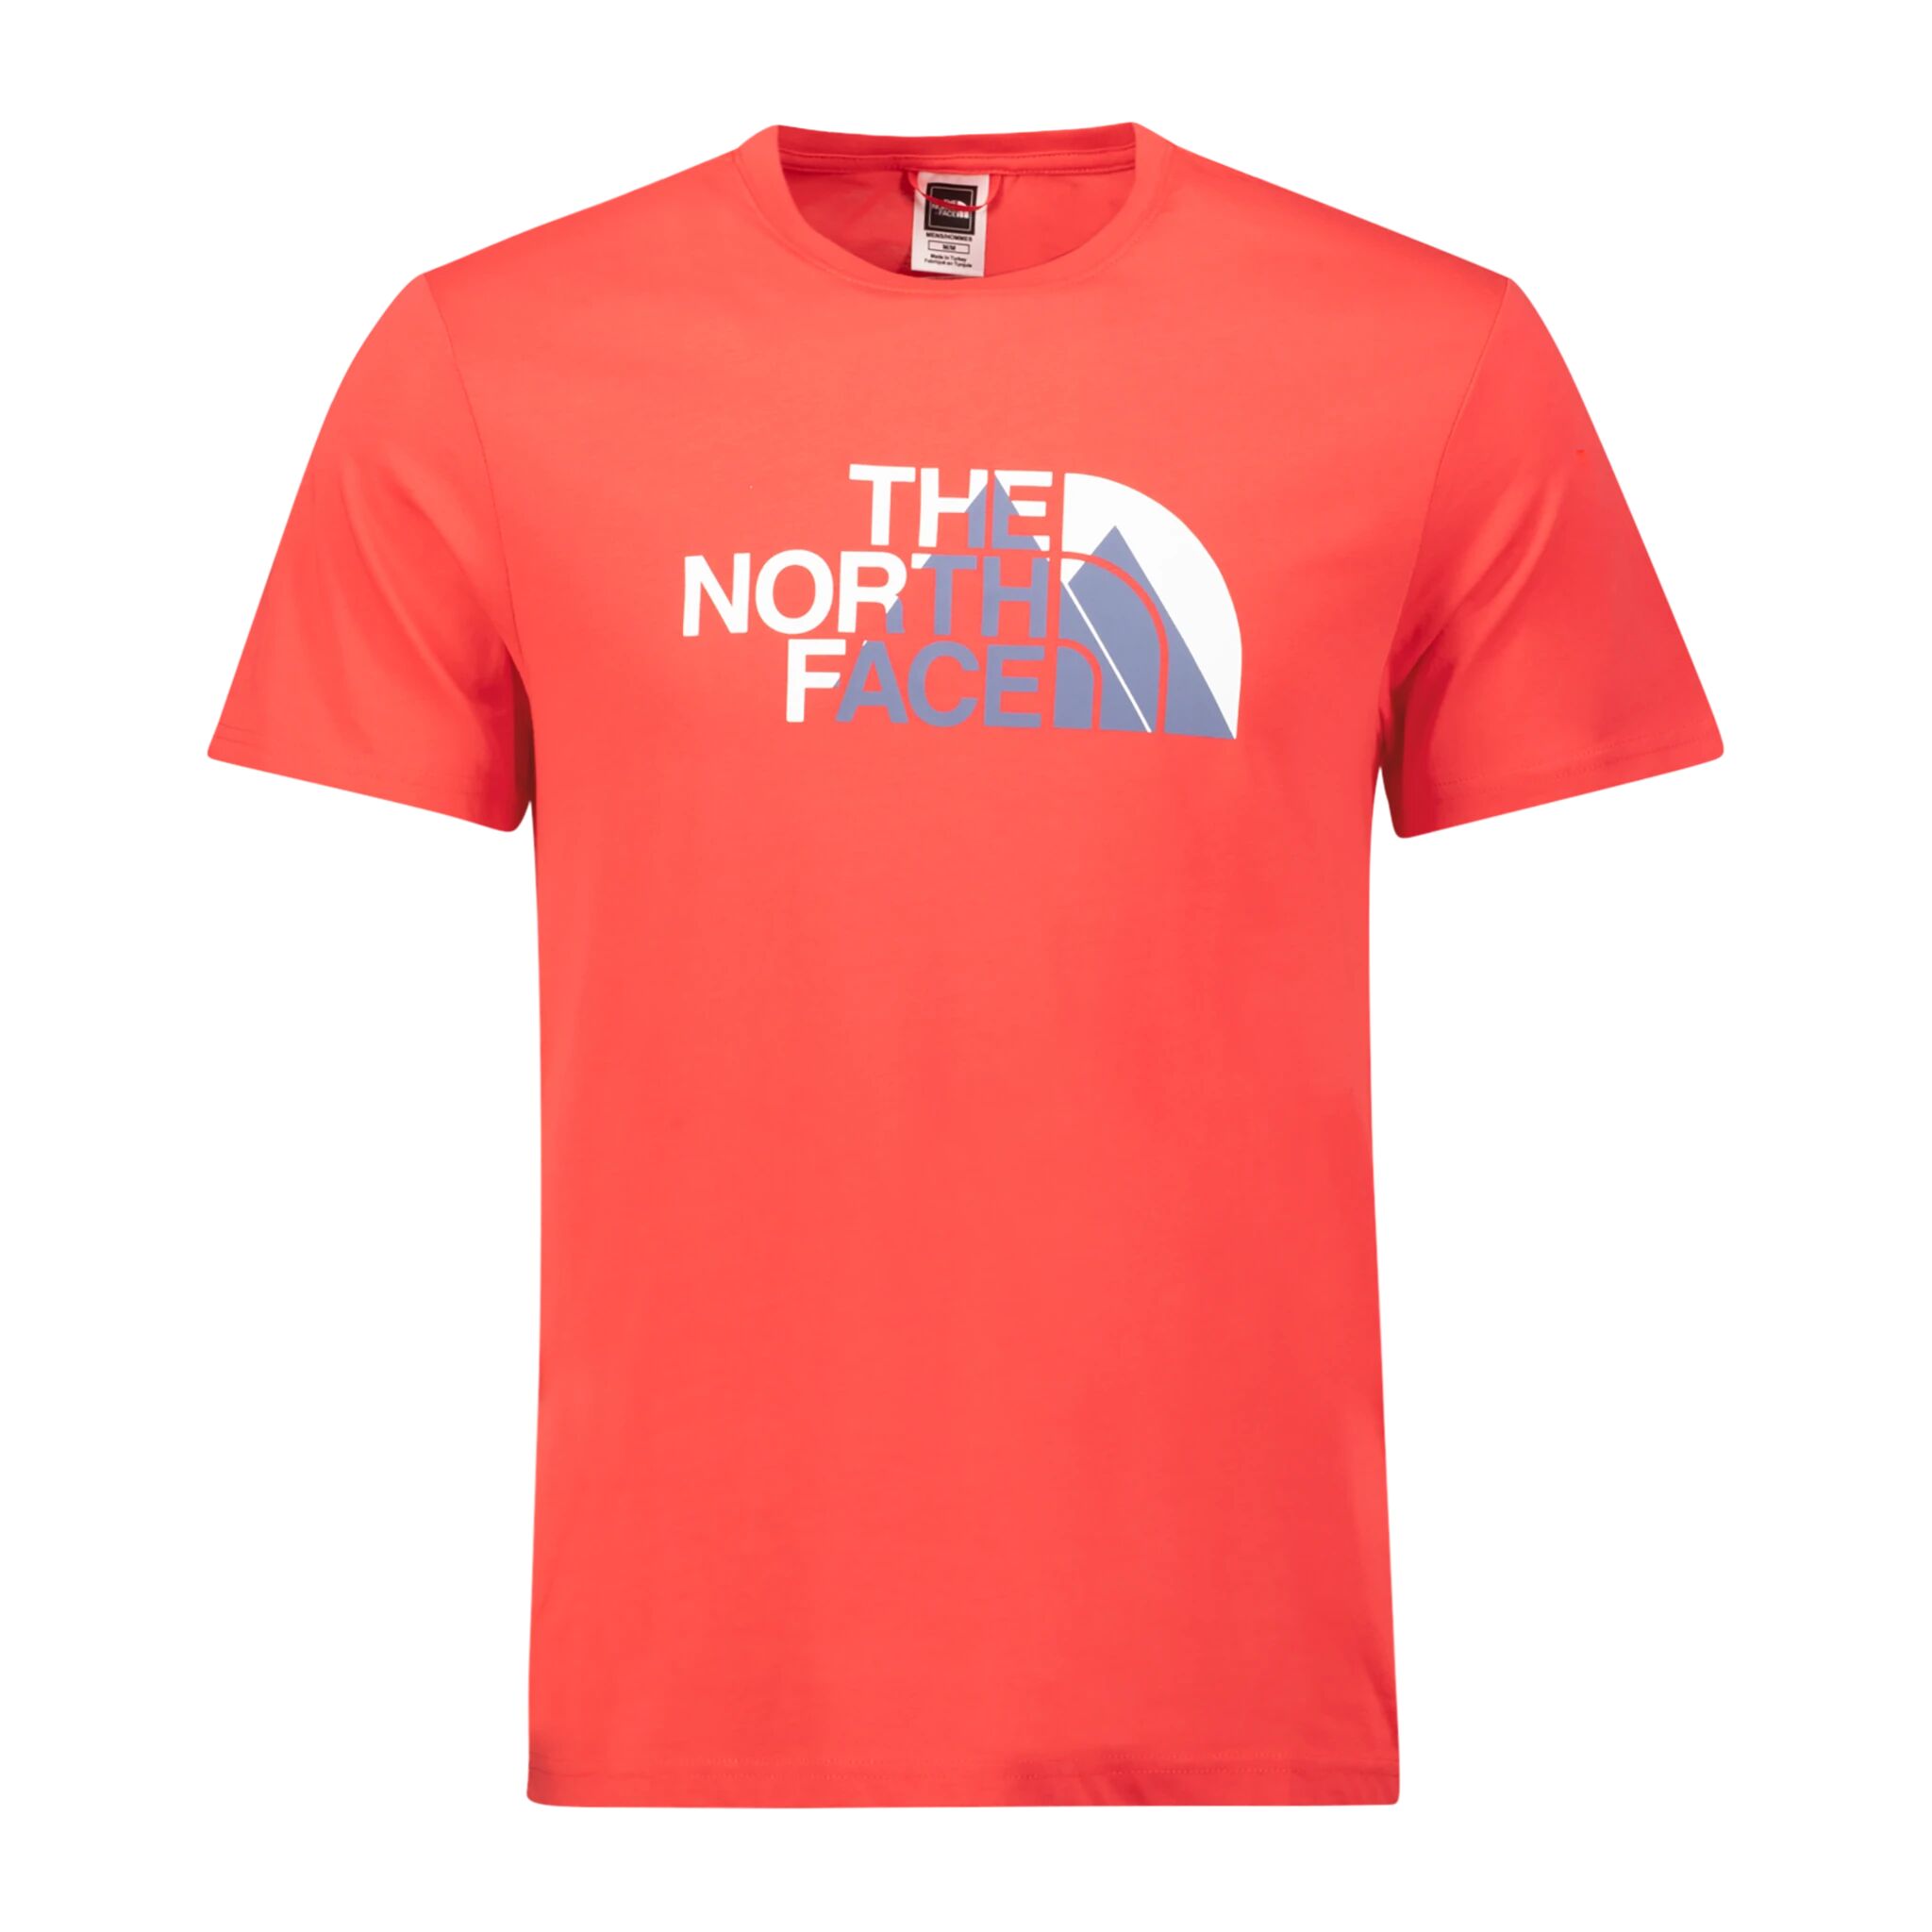 The North Face Biner Graphic 1 Tee, t-skjorte herre M Rococco red